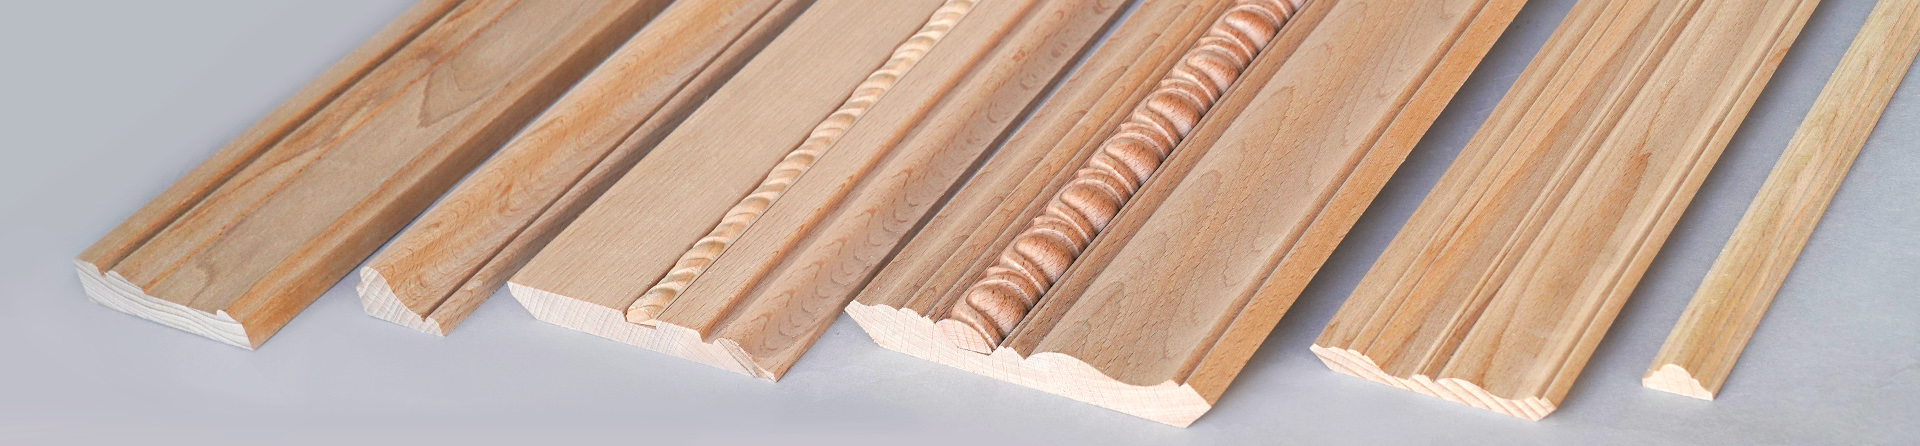 Moldings, cornices, skirting boards